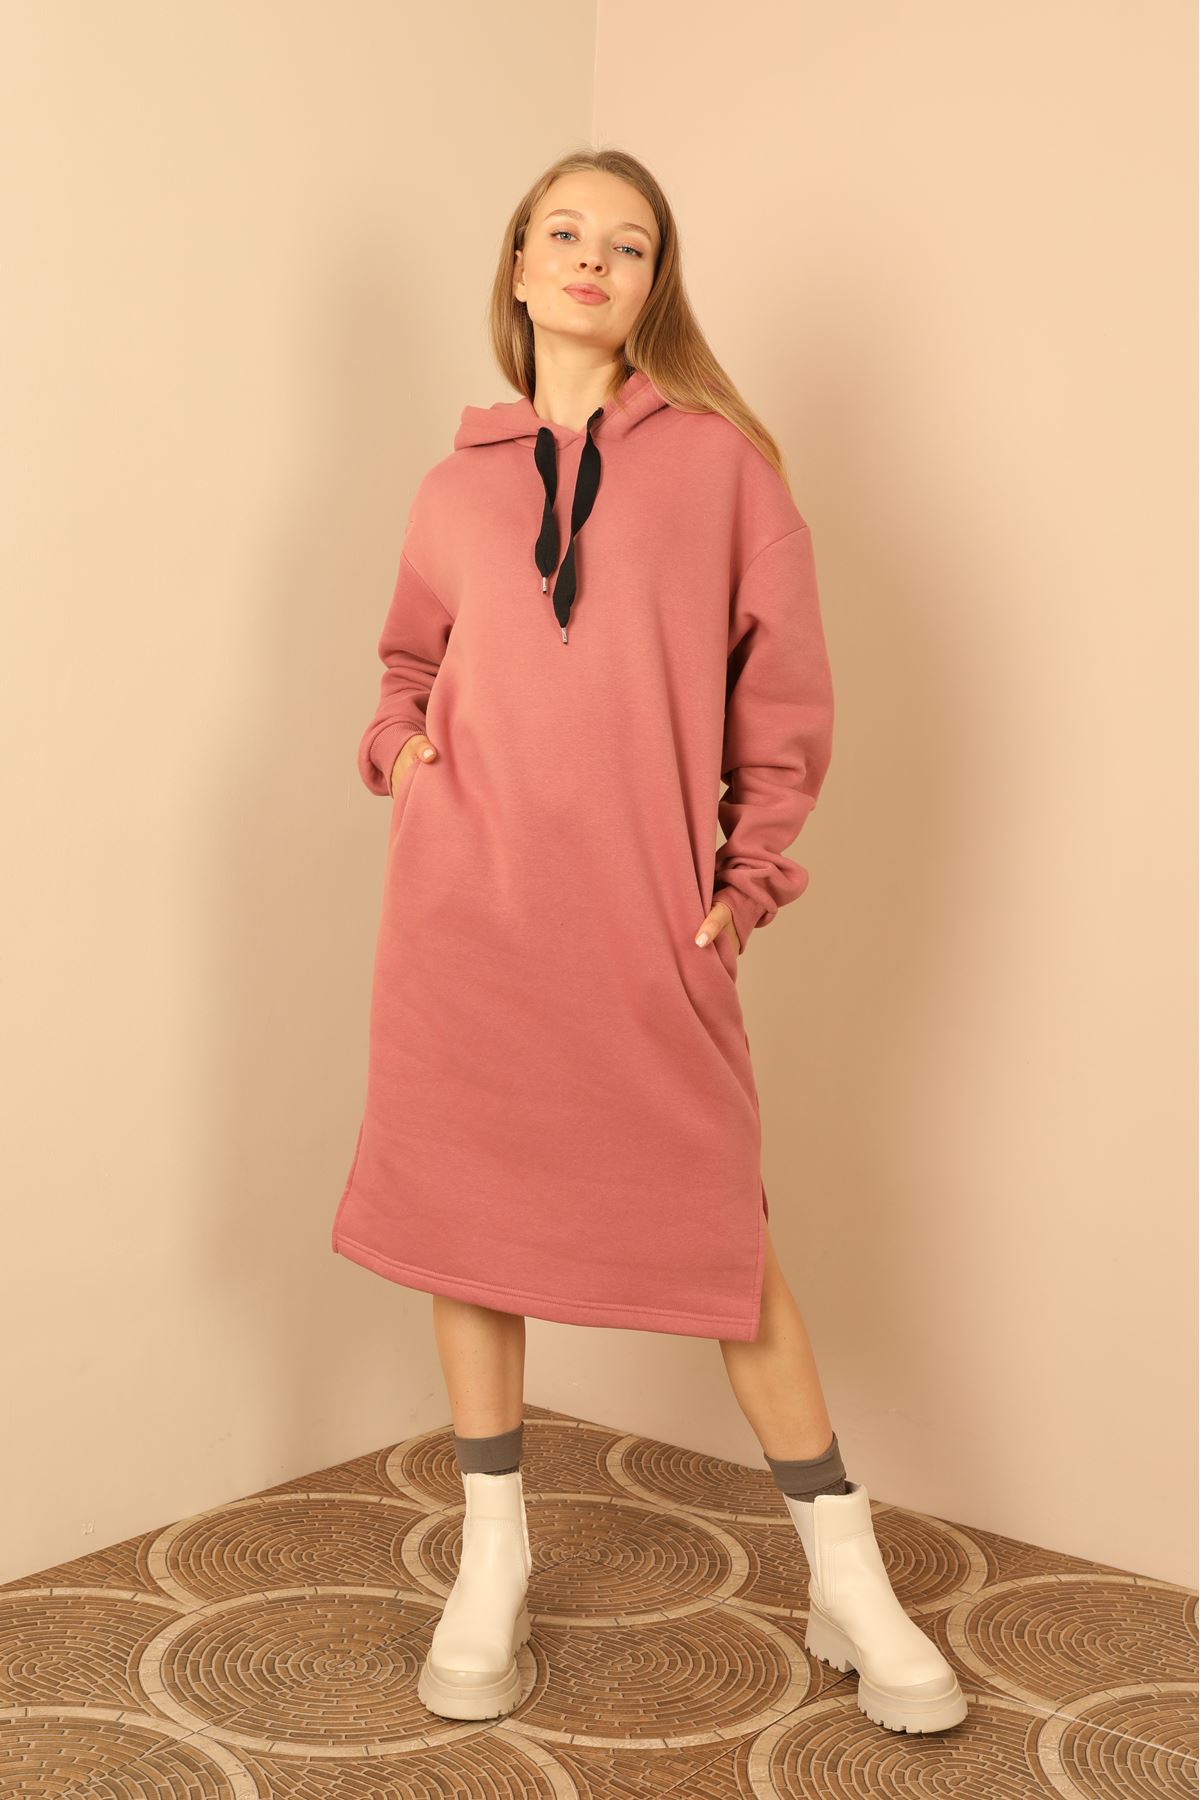 Third Knit With Wool İnside Fabric Long Sleeve Hooded Oversize Women Dress - Rose 